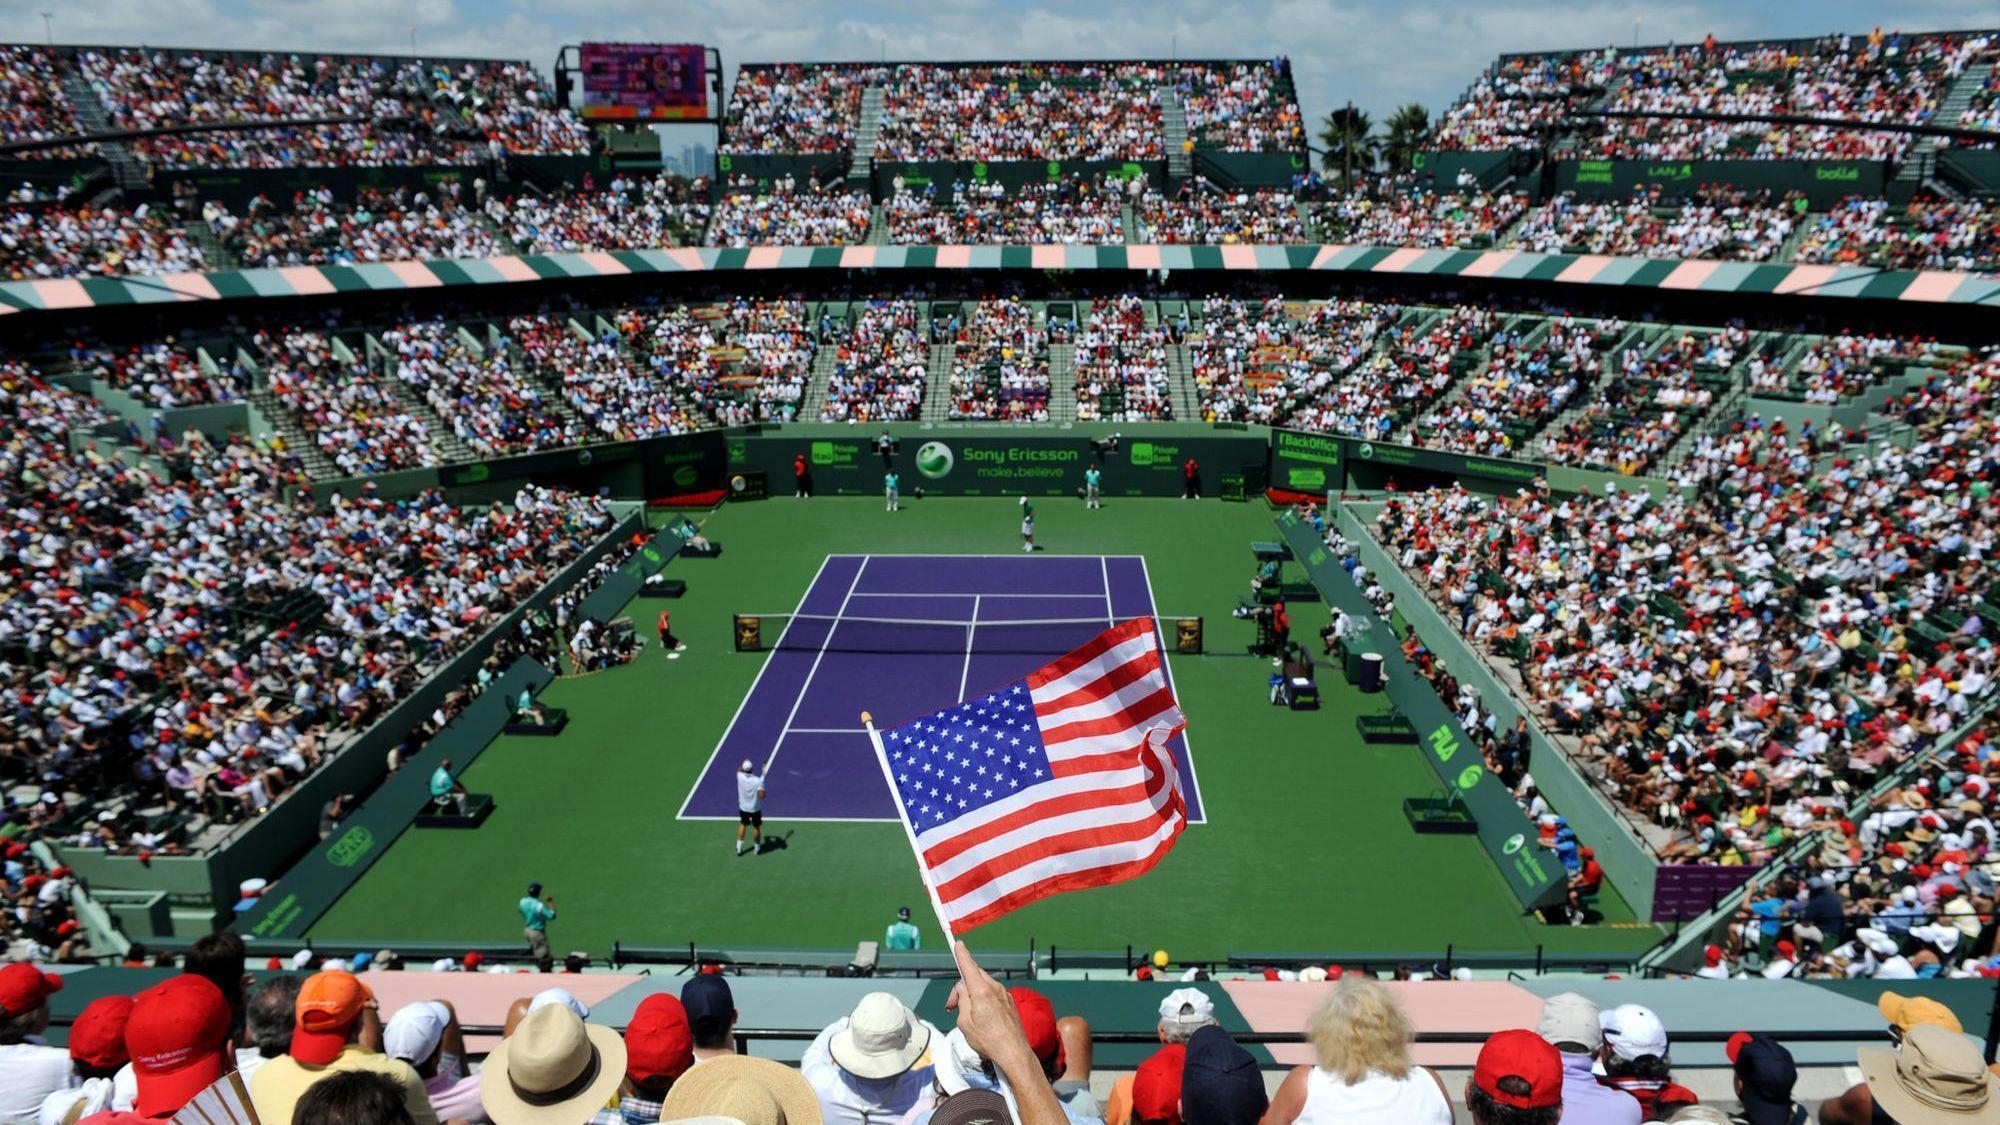 The Miami Open is leaving Key Biscayne — share your tennis memories